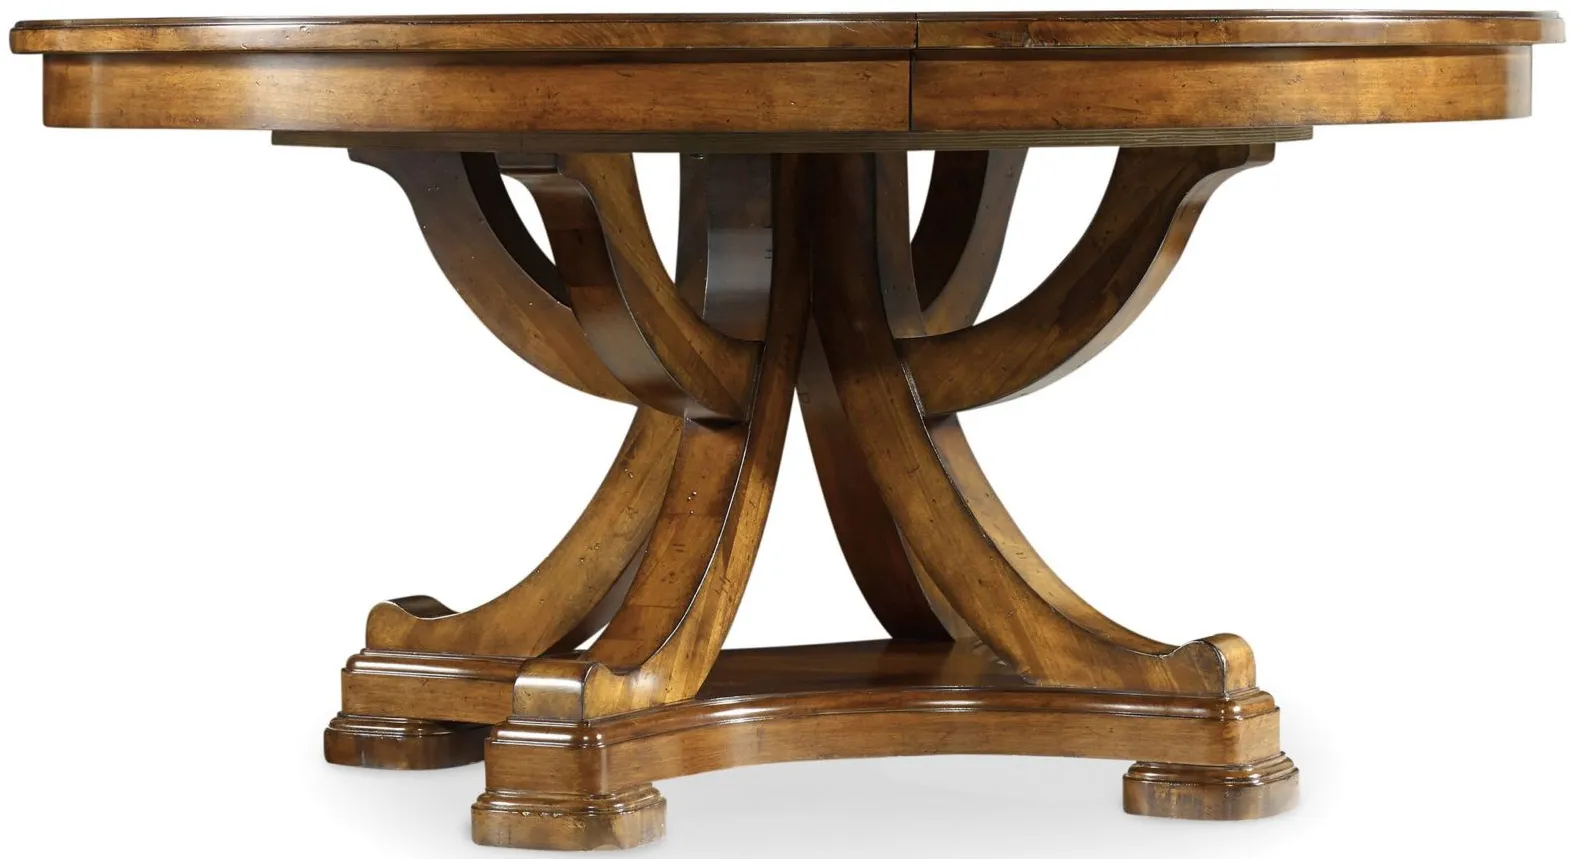 Tynecastle Round Pedestal Dining Table with Leaf in Chestnut by Hooker Furniture